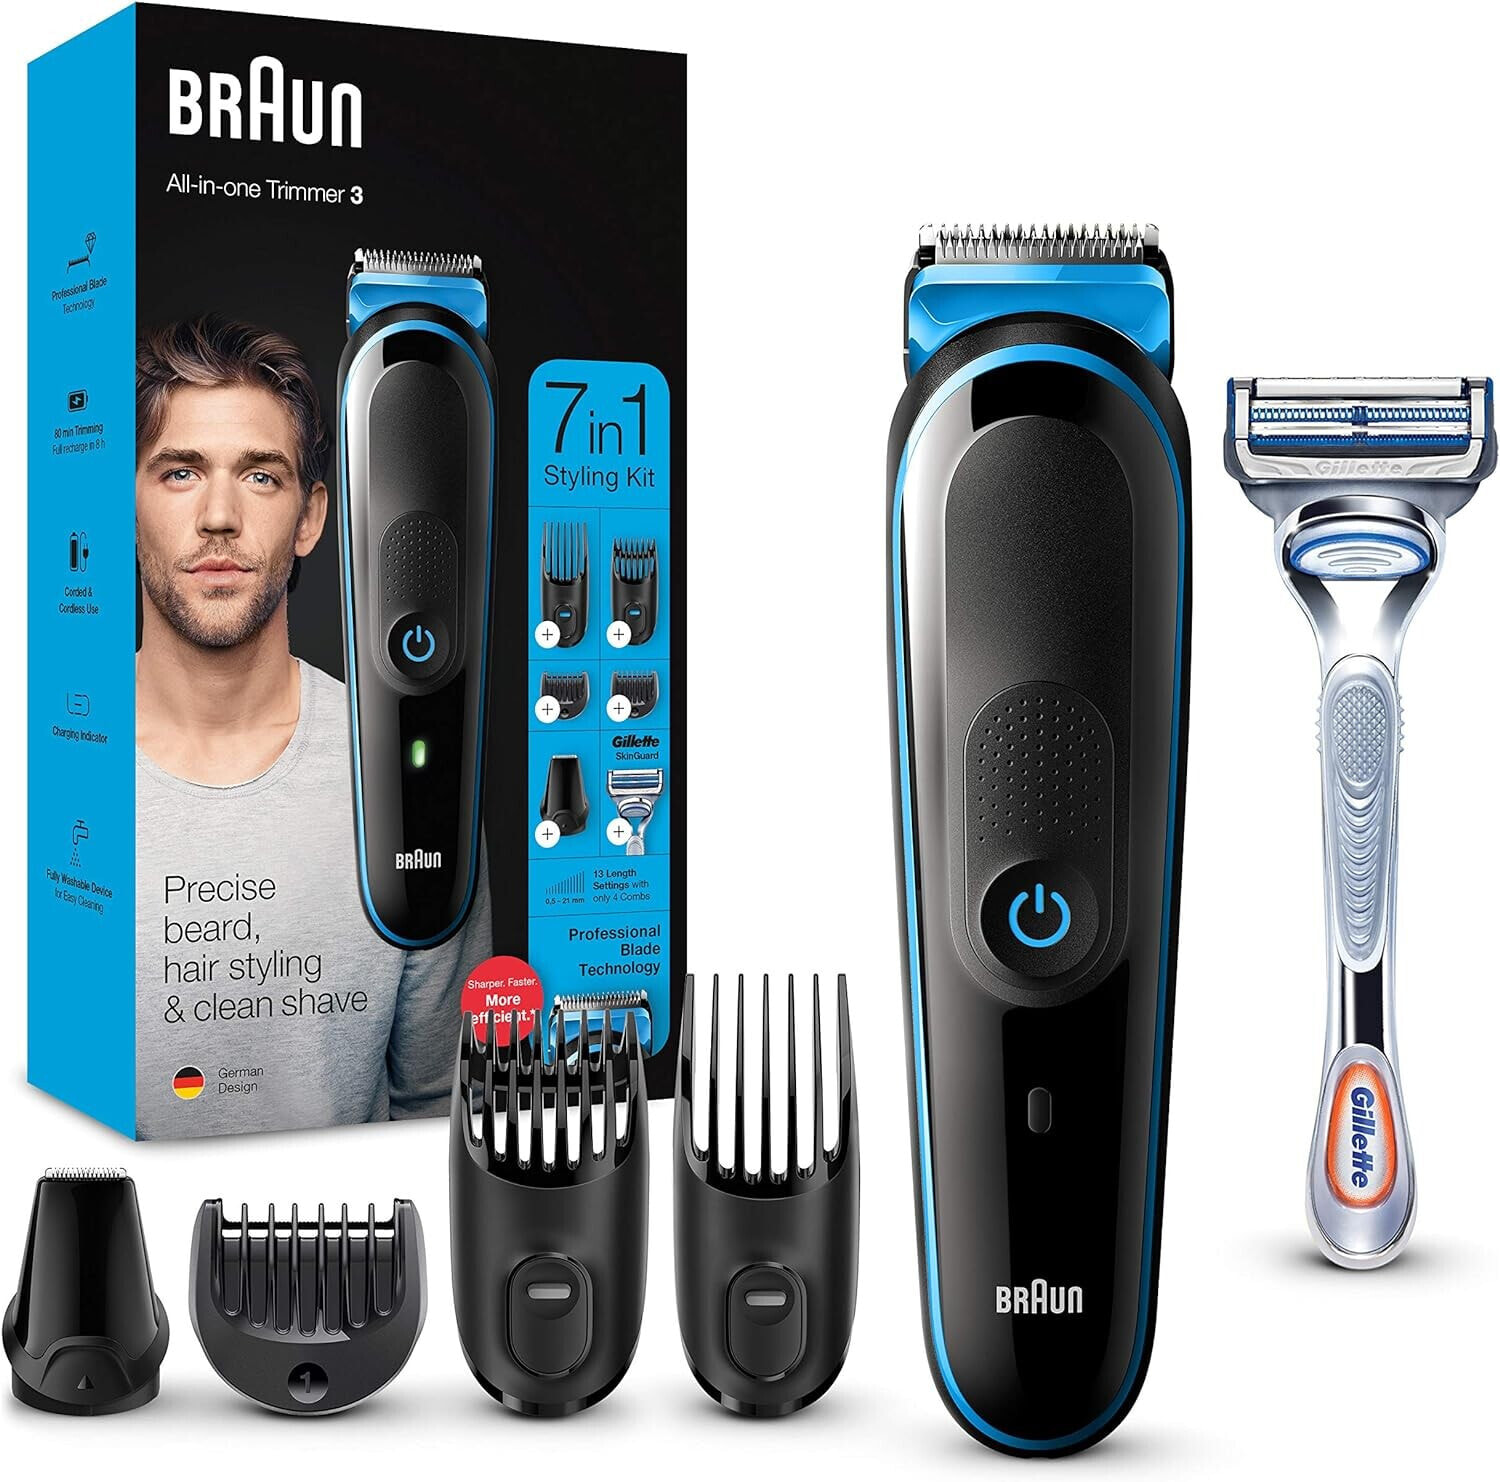 Braun Bodygroomer 5, Body Care & Hair Removal for Men, BG5350, Grey/White & Series X XT5200 All-in-One Beard Trimmer, Body Groomer/Electric Shaver Men, Durable Blade, 6 Comb Attachments